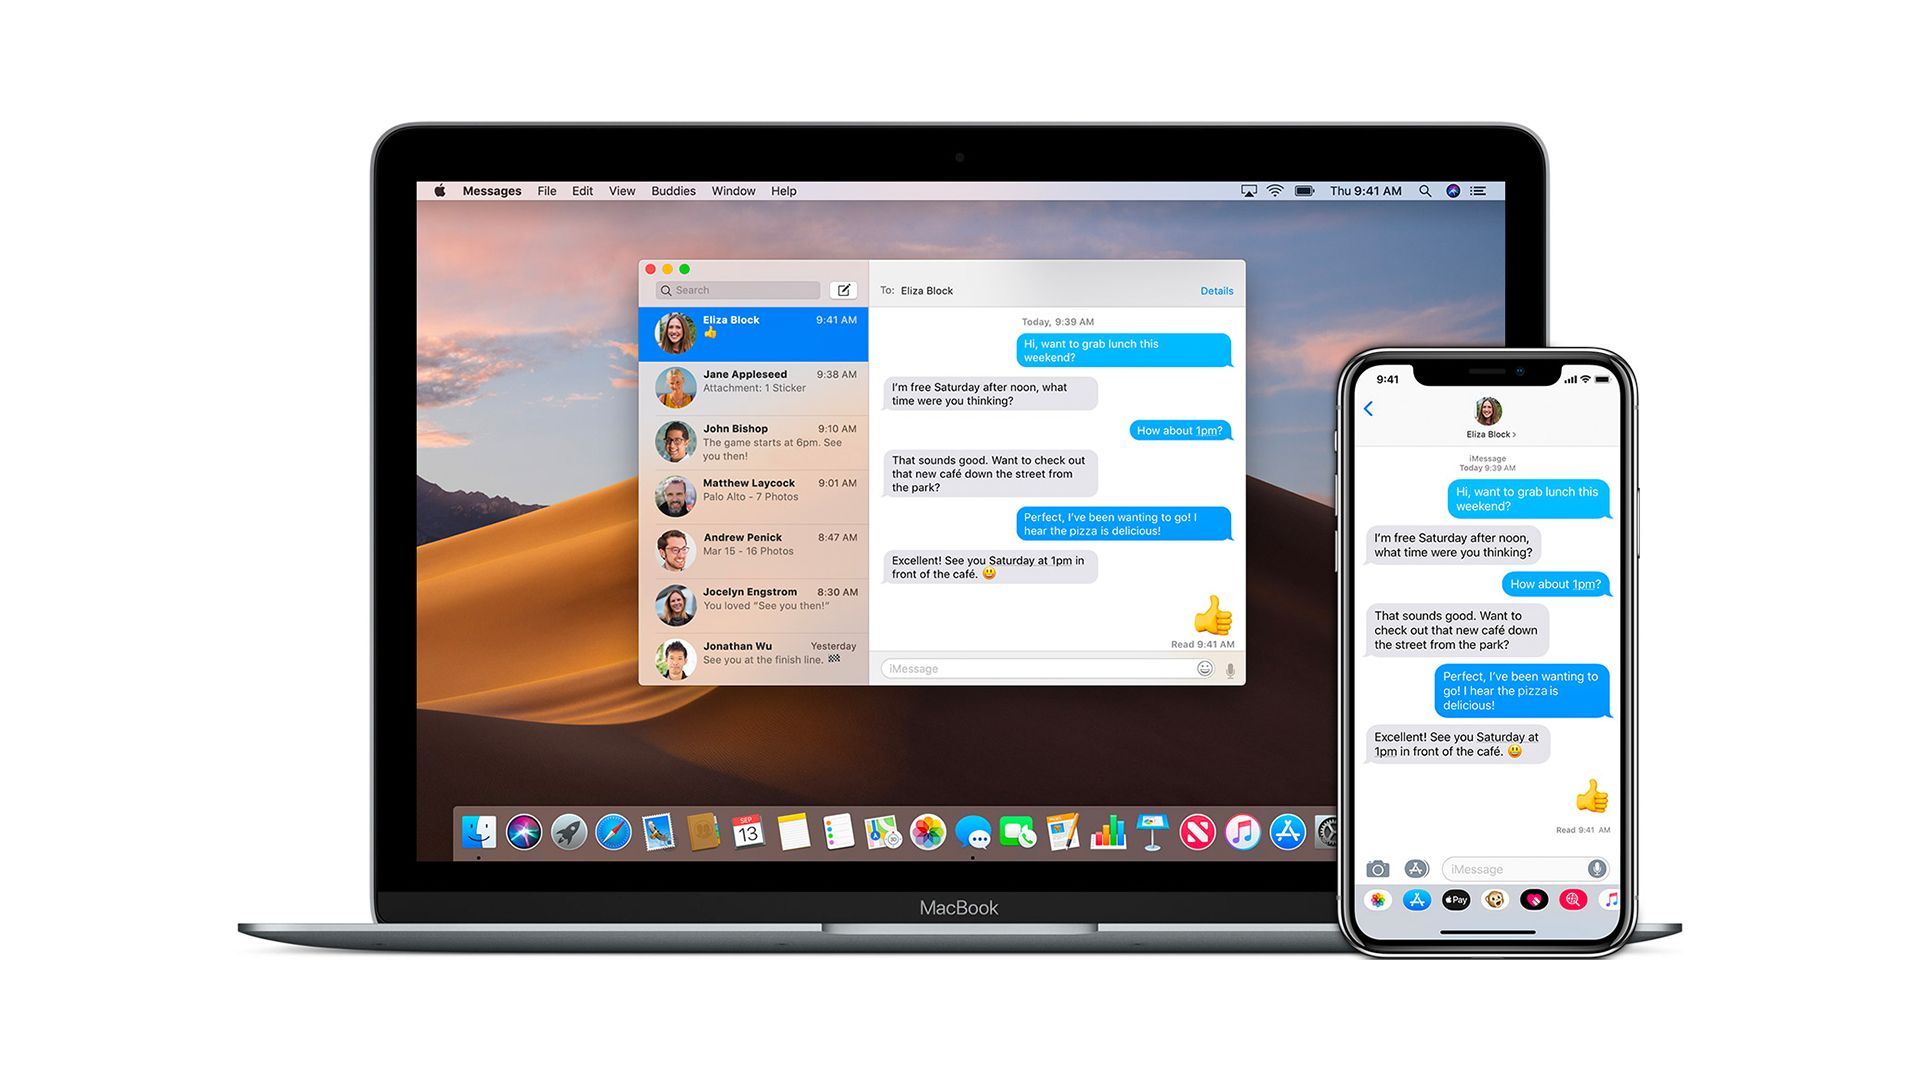 In this article, we will be covering how to turn off iMessage on Macbook, so you can work without any notifications or distractions.